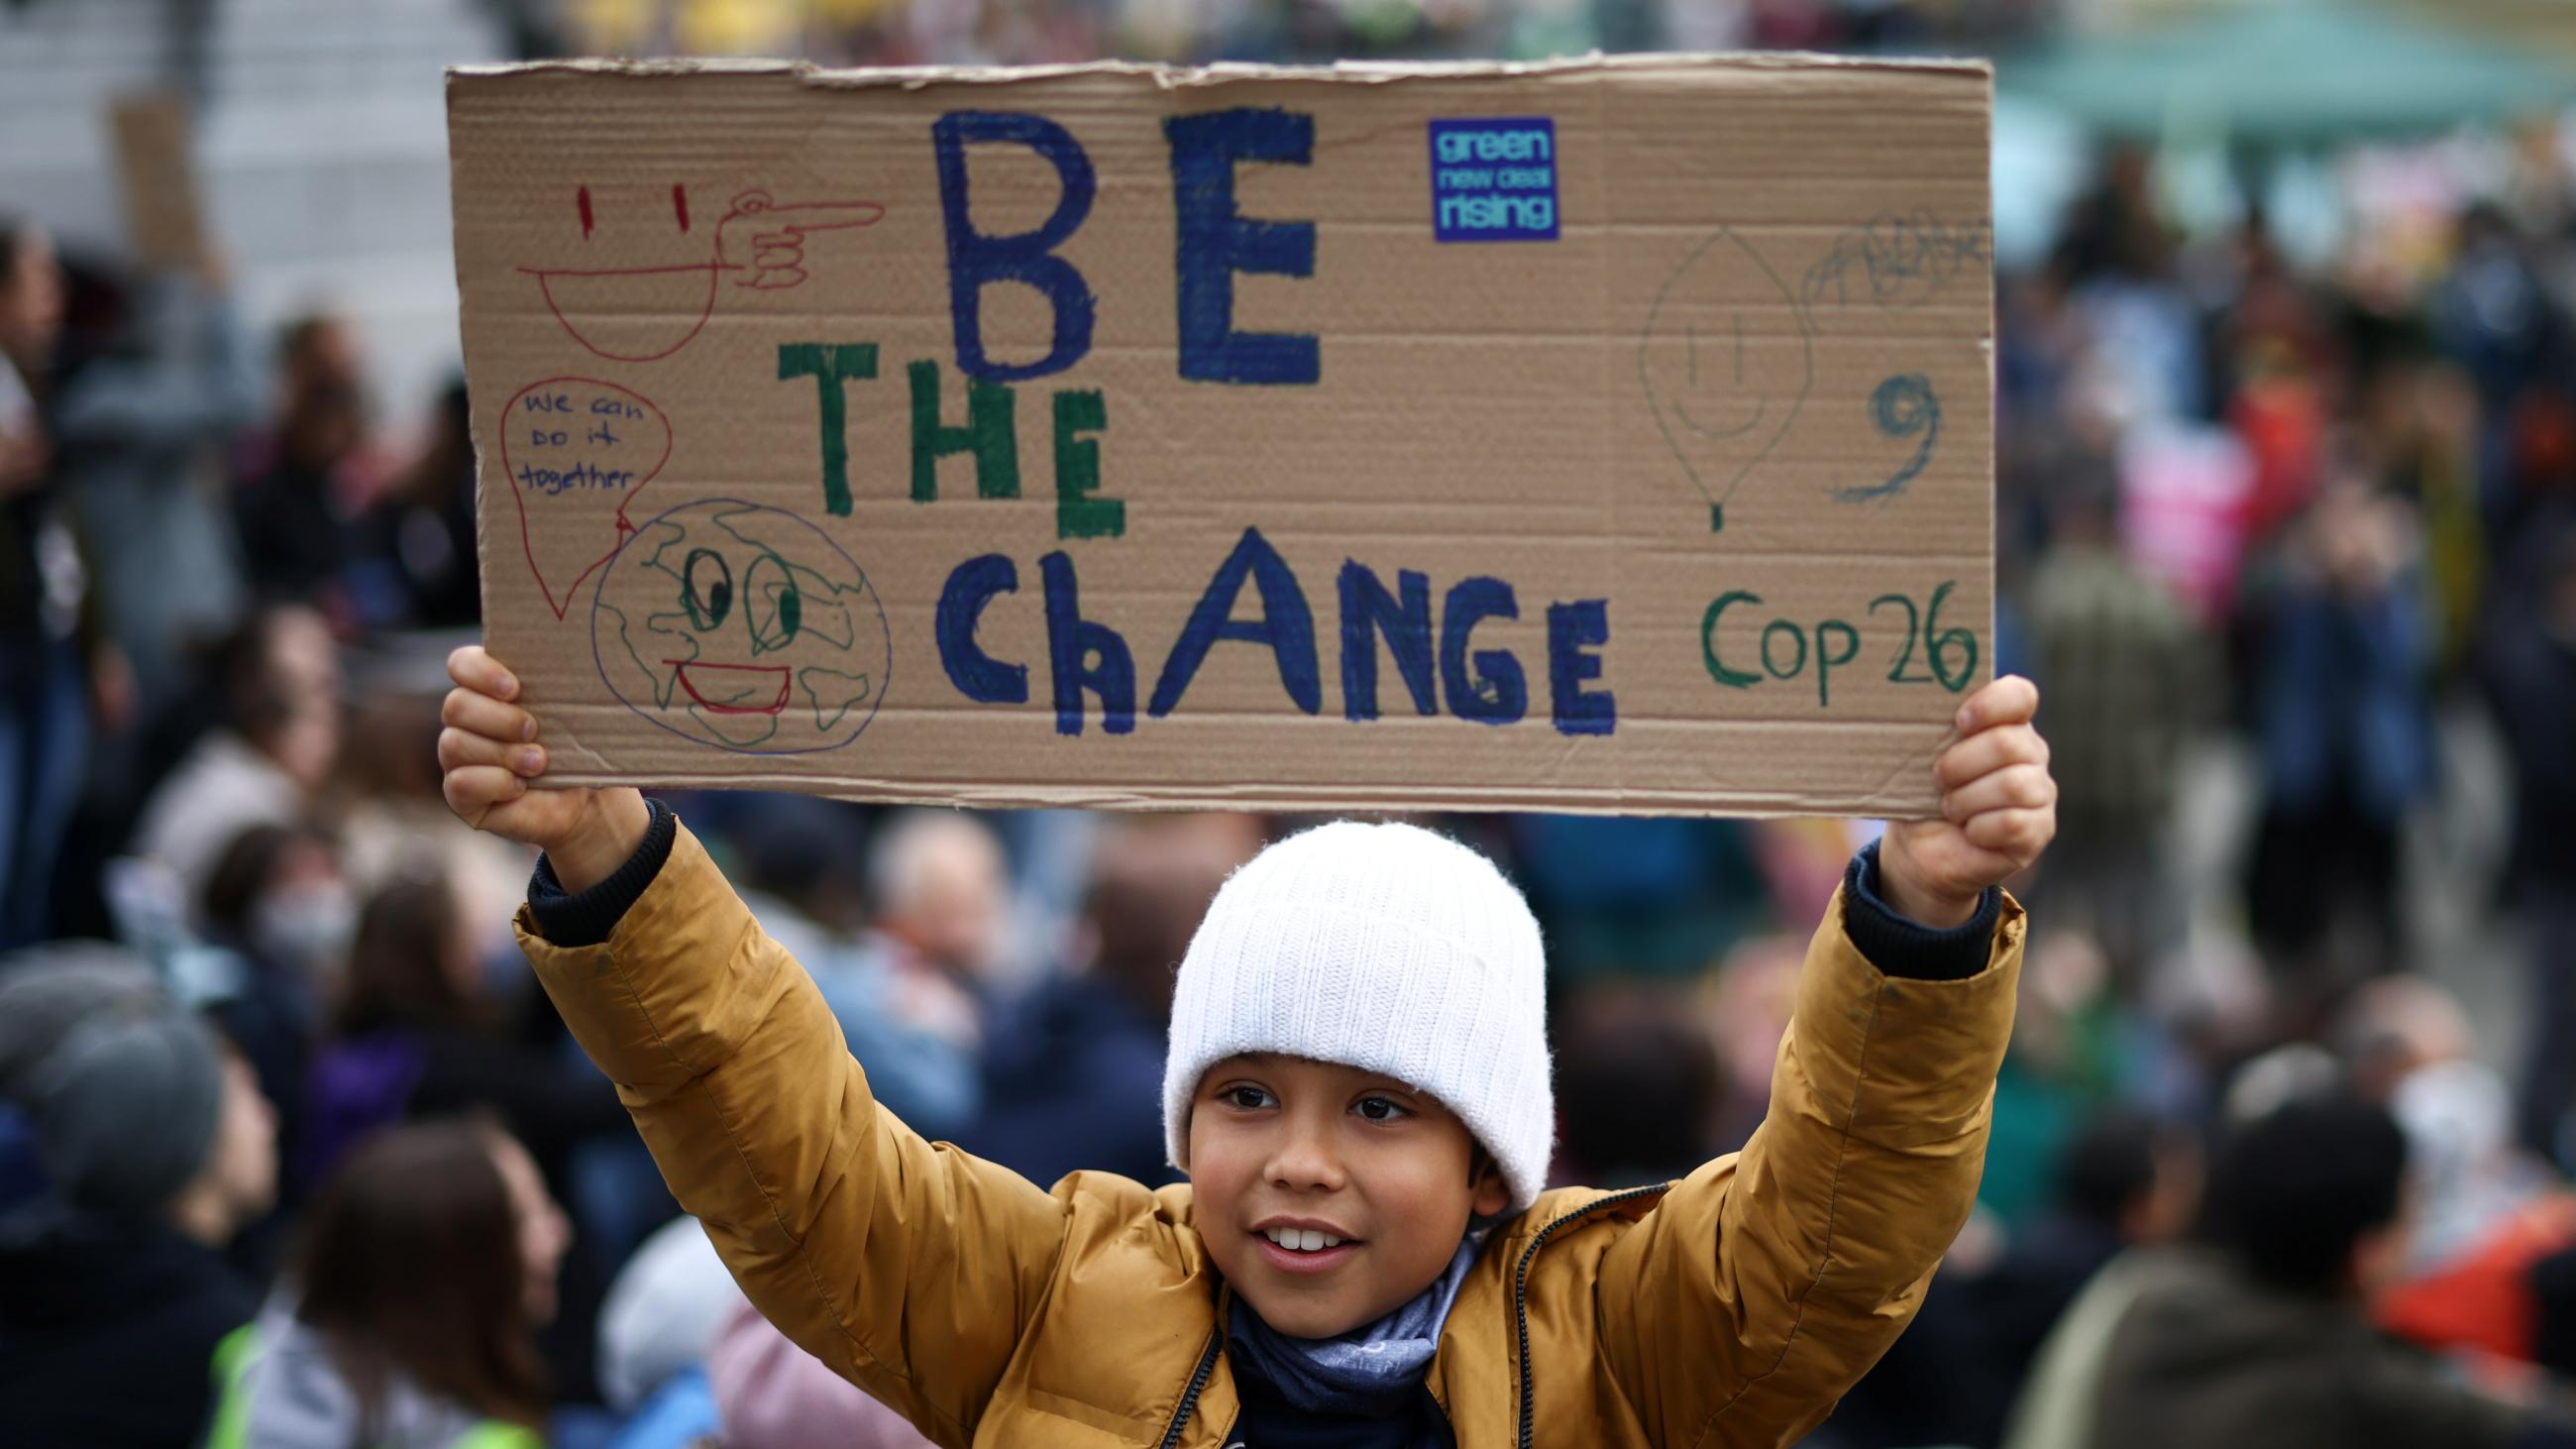 In many cities around the world, climate activists marched to send a message to decision-makers in Glasgow. At a London protest, a child holds a banner on November 6, 2021.